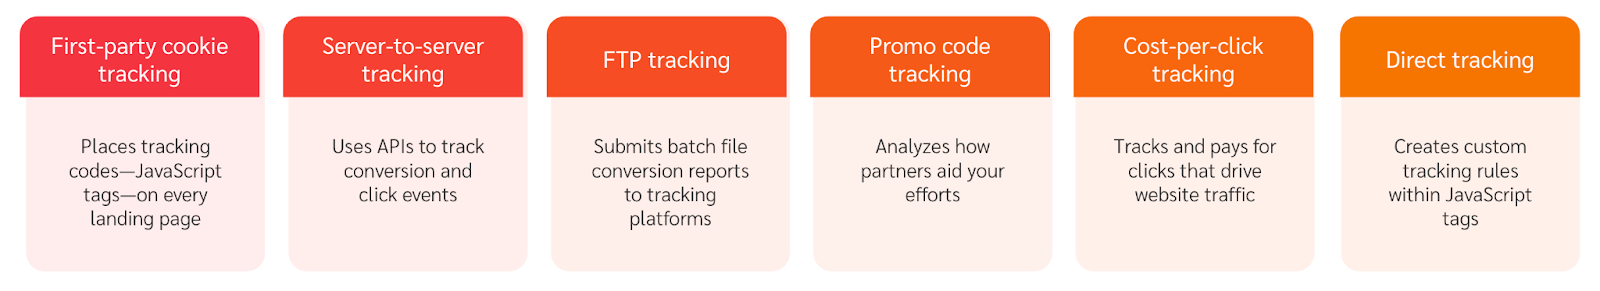 6 methods of affiliate tracking